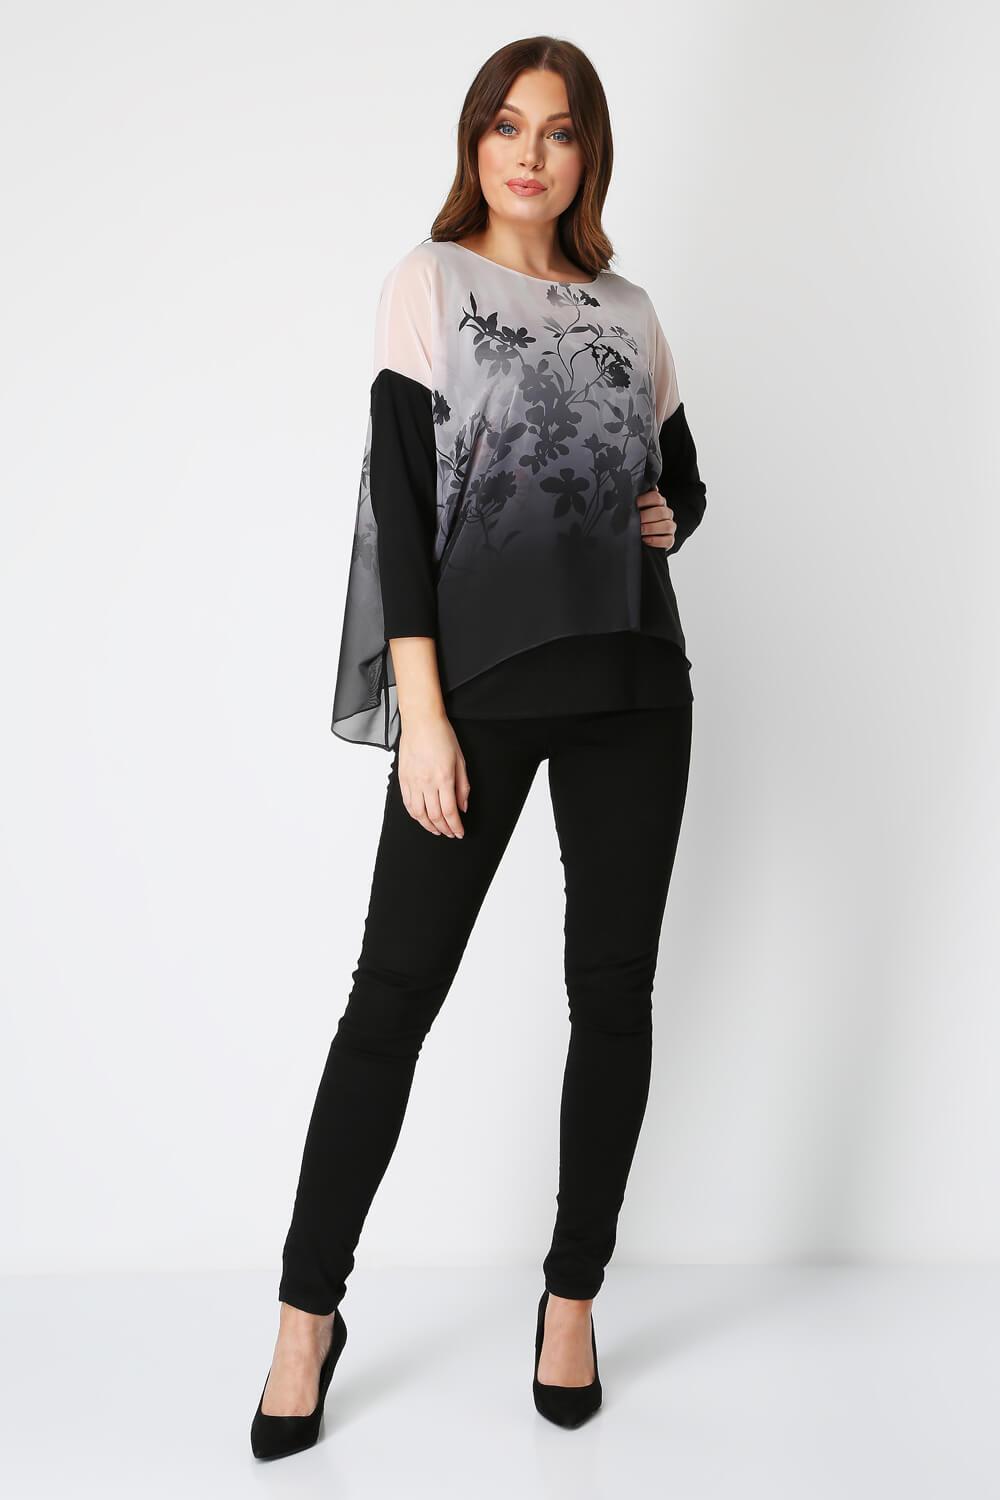 Black Soft Floral Overlay Chiffon Top, Image 3 of 5